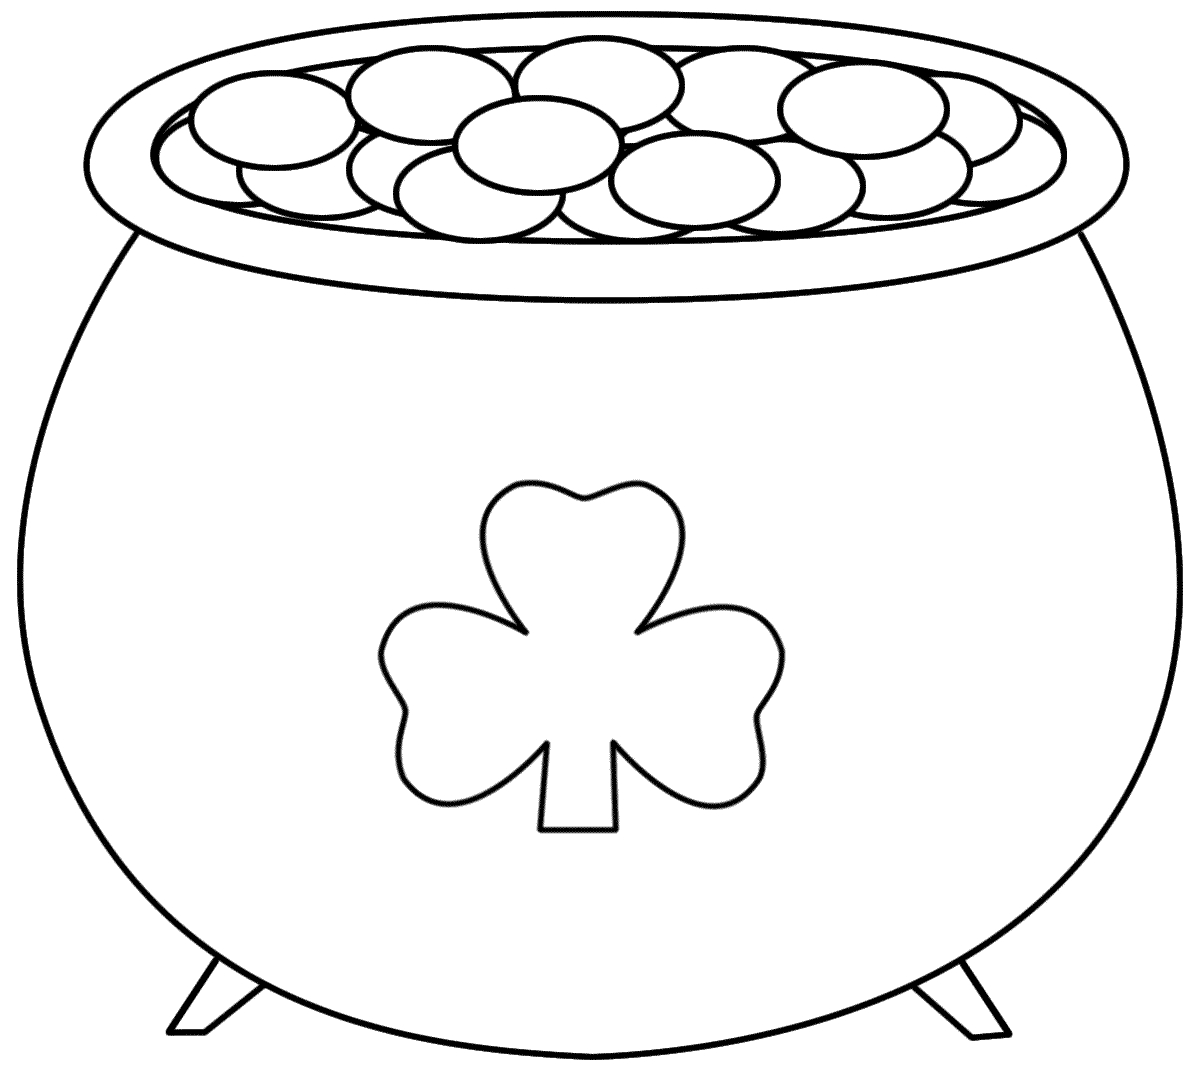 Pot+Of+Gold+Printable | Pot Of Gold - Coloring Pages | Saint - Pot Of Gold Template Free Printable